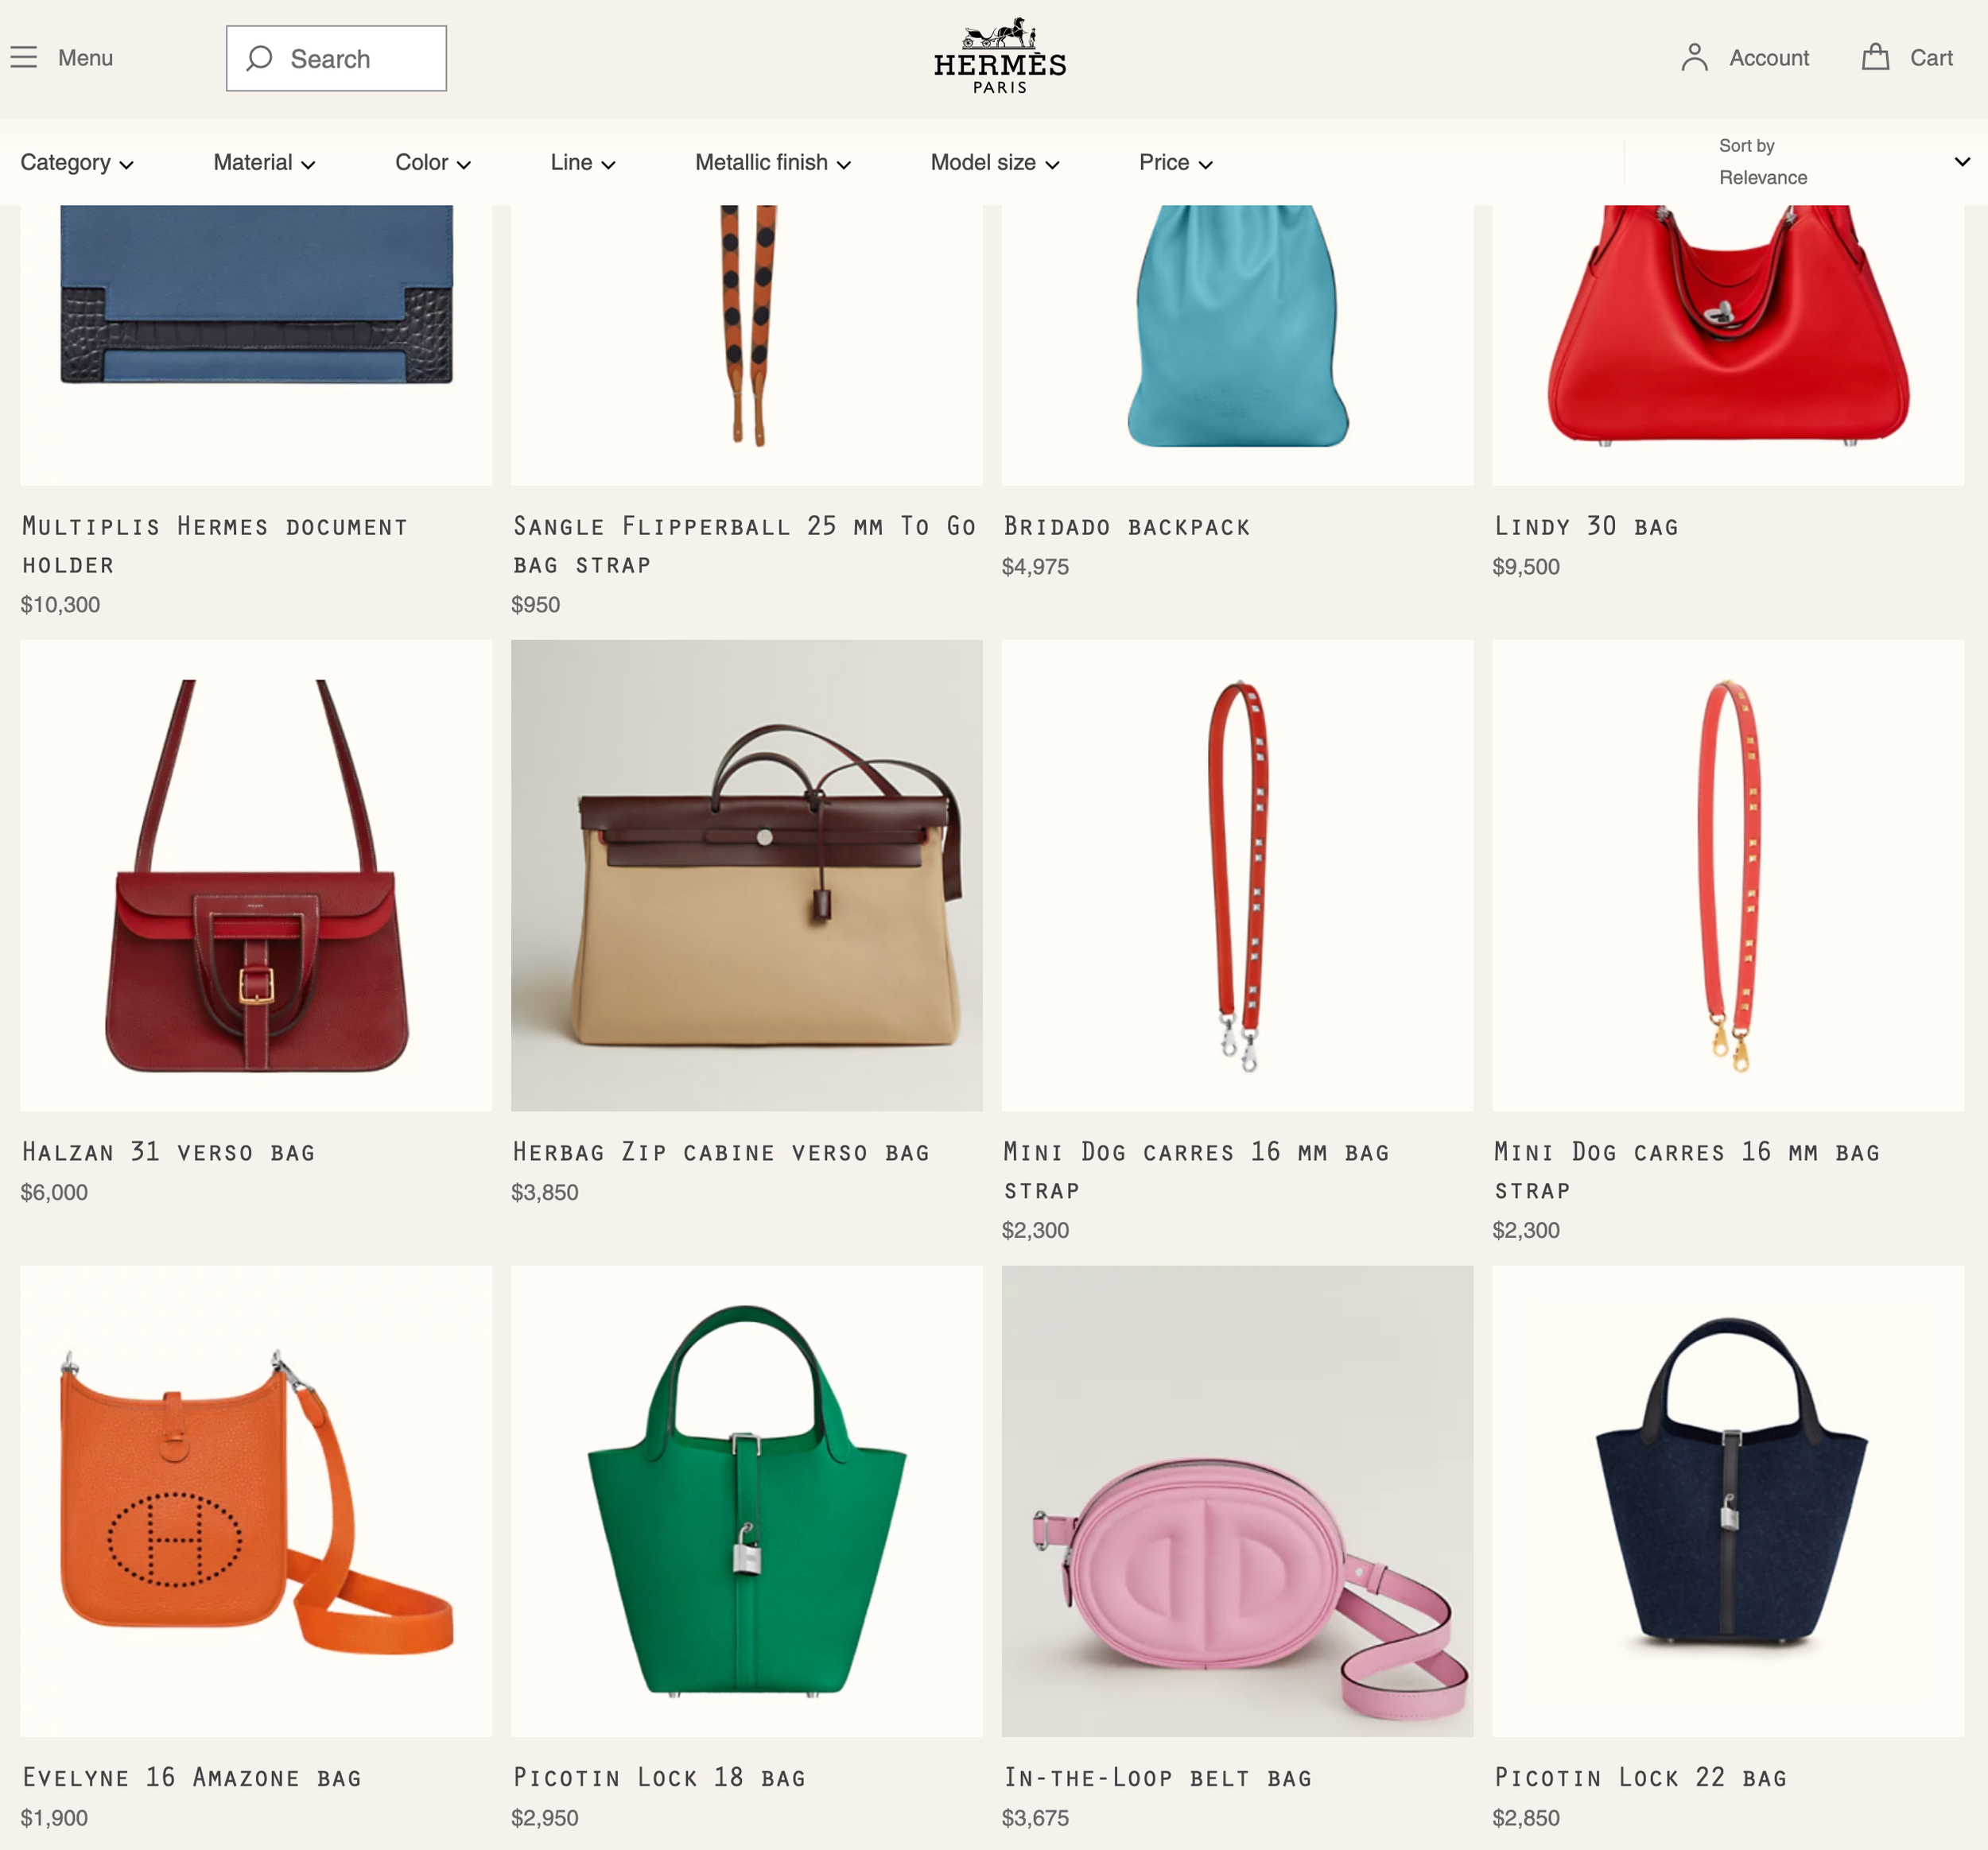 All you Need to Know About Buying a Hermes Kelly Handbag! 